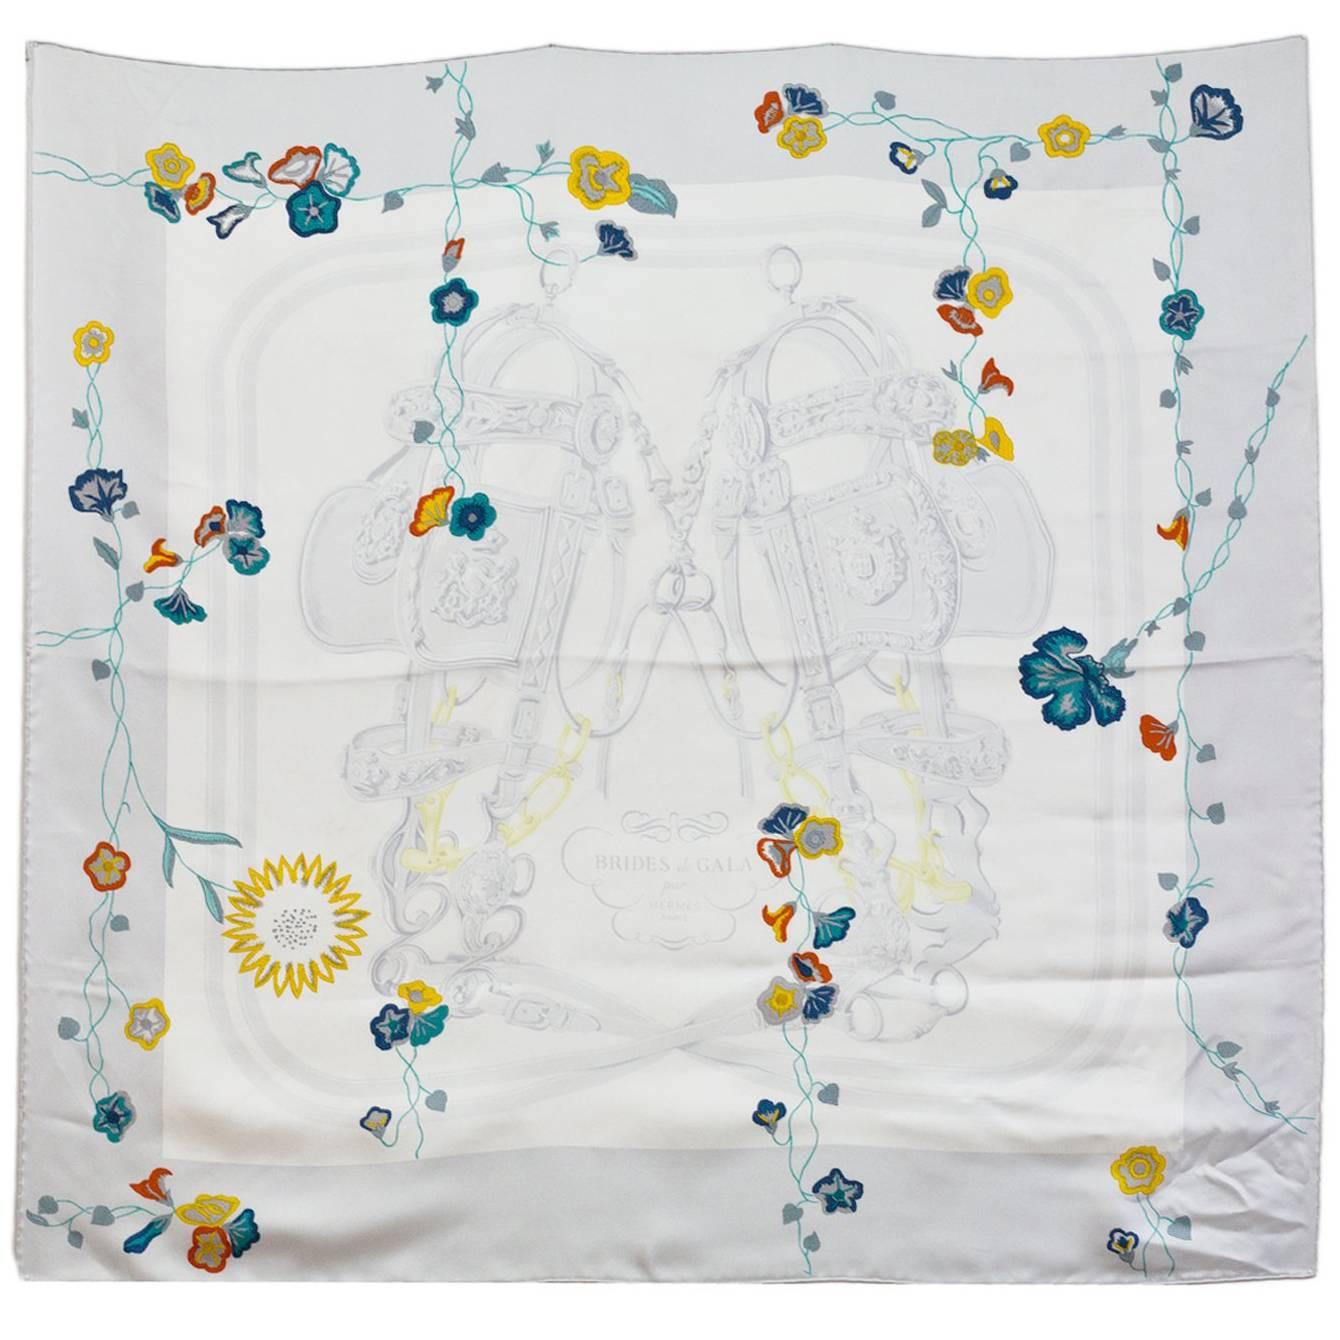 Hermes Limited Edition White Floral Brides de Gala Silk 90cm Scarf with Box